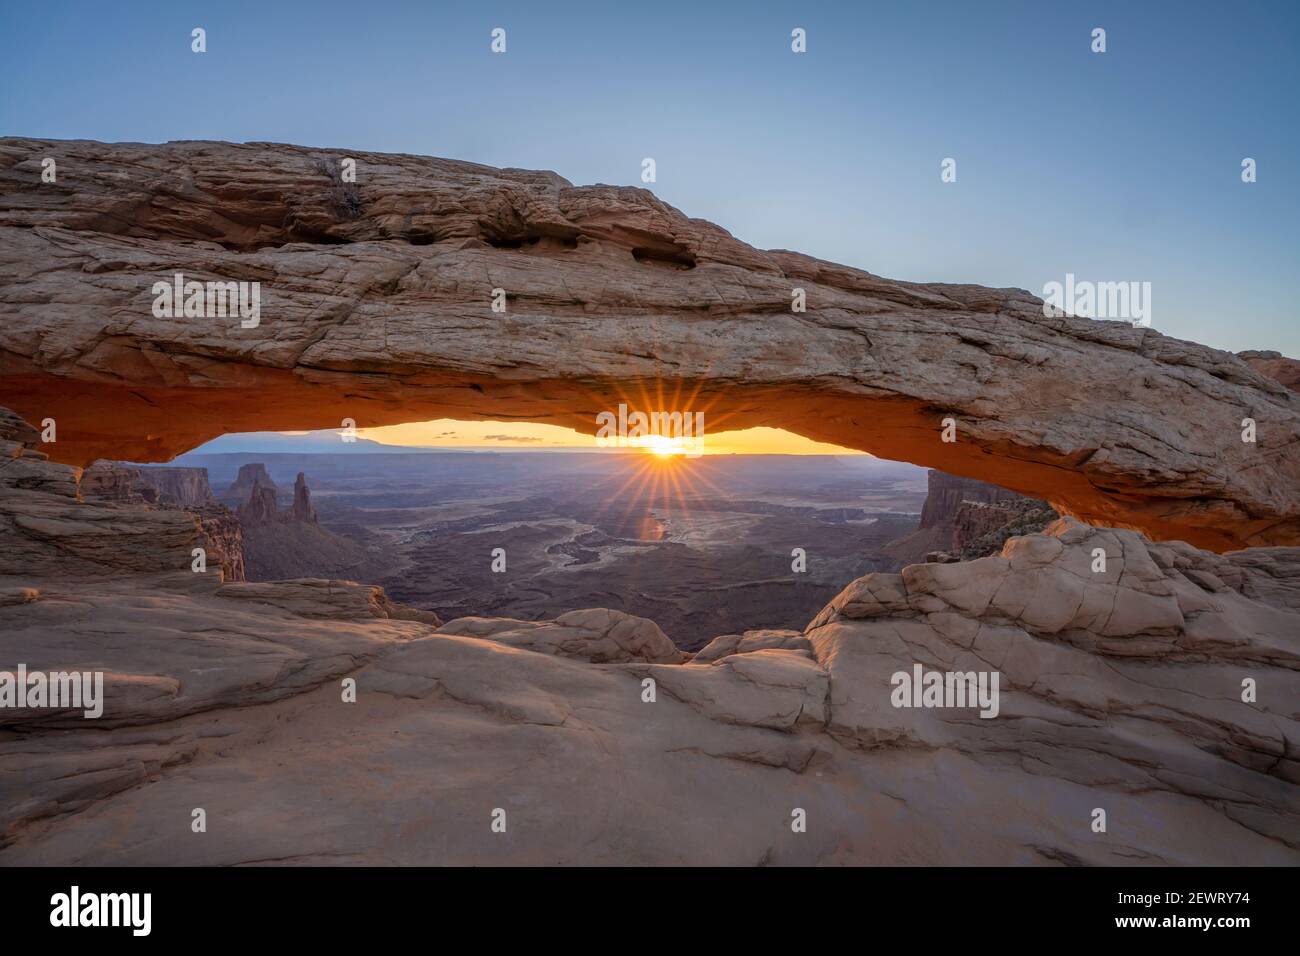 Sunrise at Mesa Arch with glowing arch and sunburst, Canyonlands National Park, Utah, United States of America, North America Stock Photo